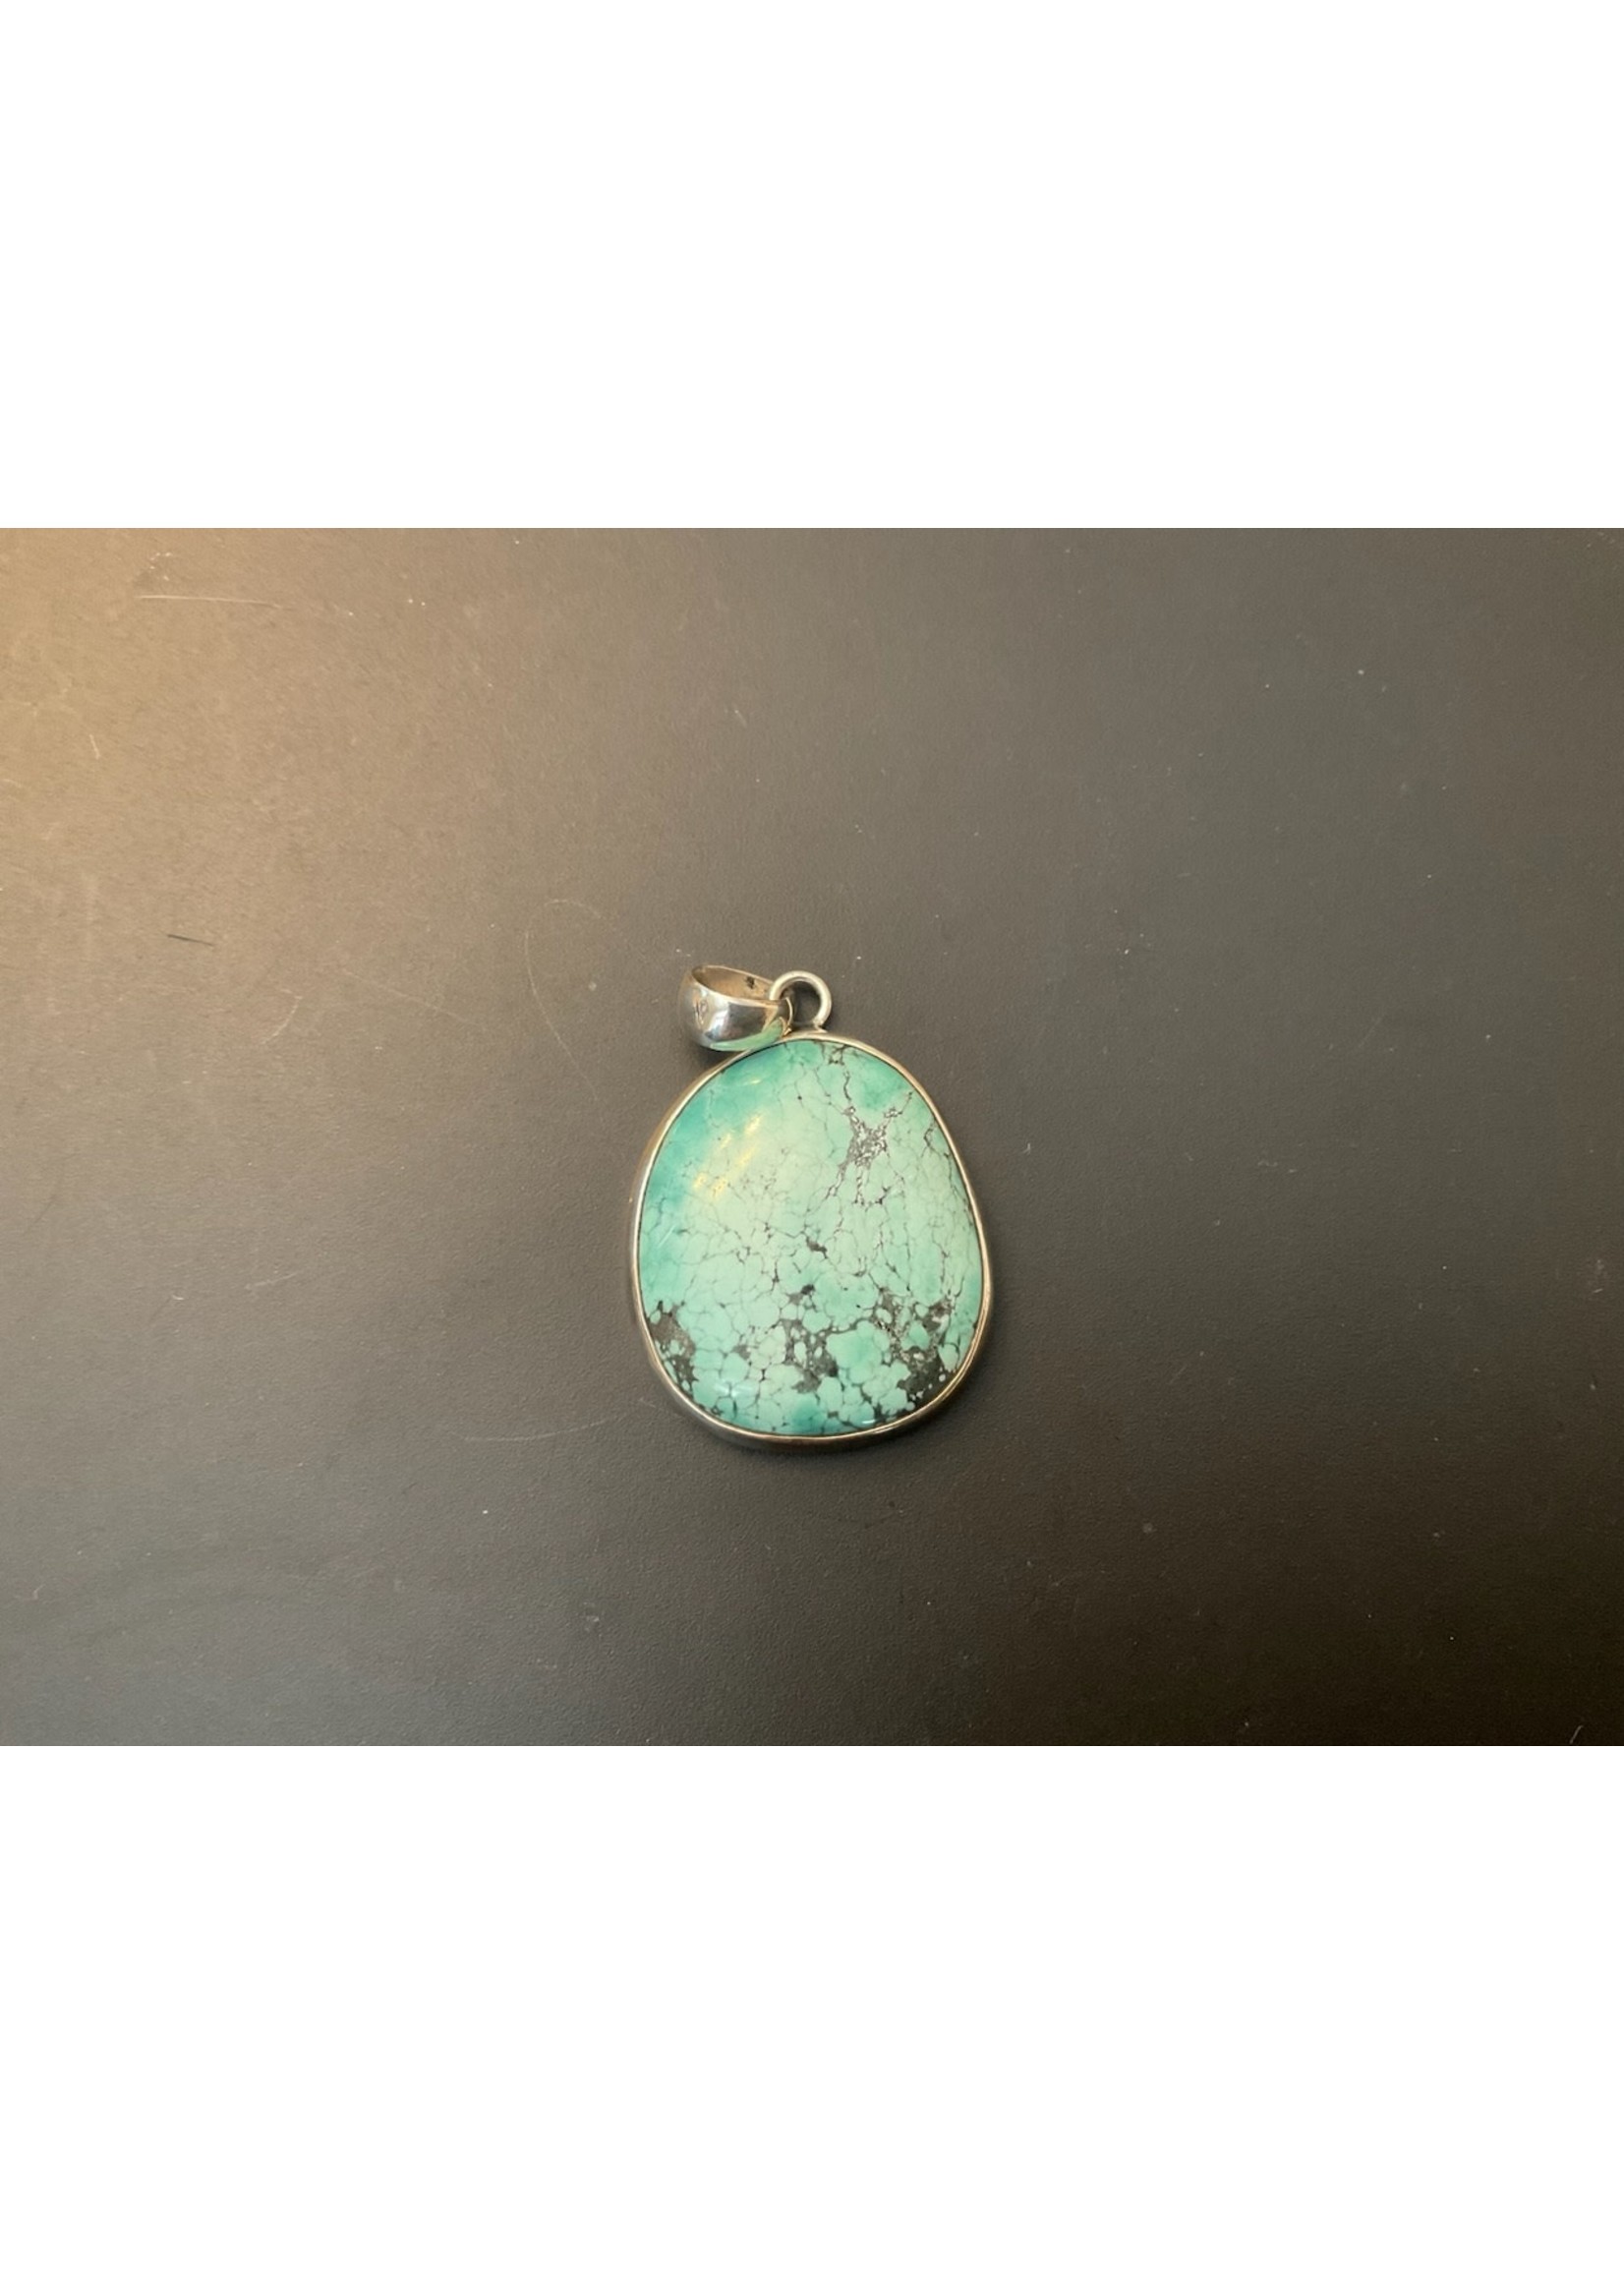 Turquoise Pendant set in Sterling - 1 1/2”